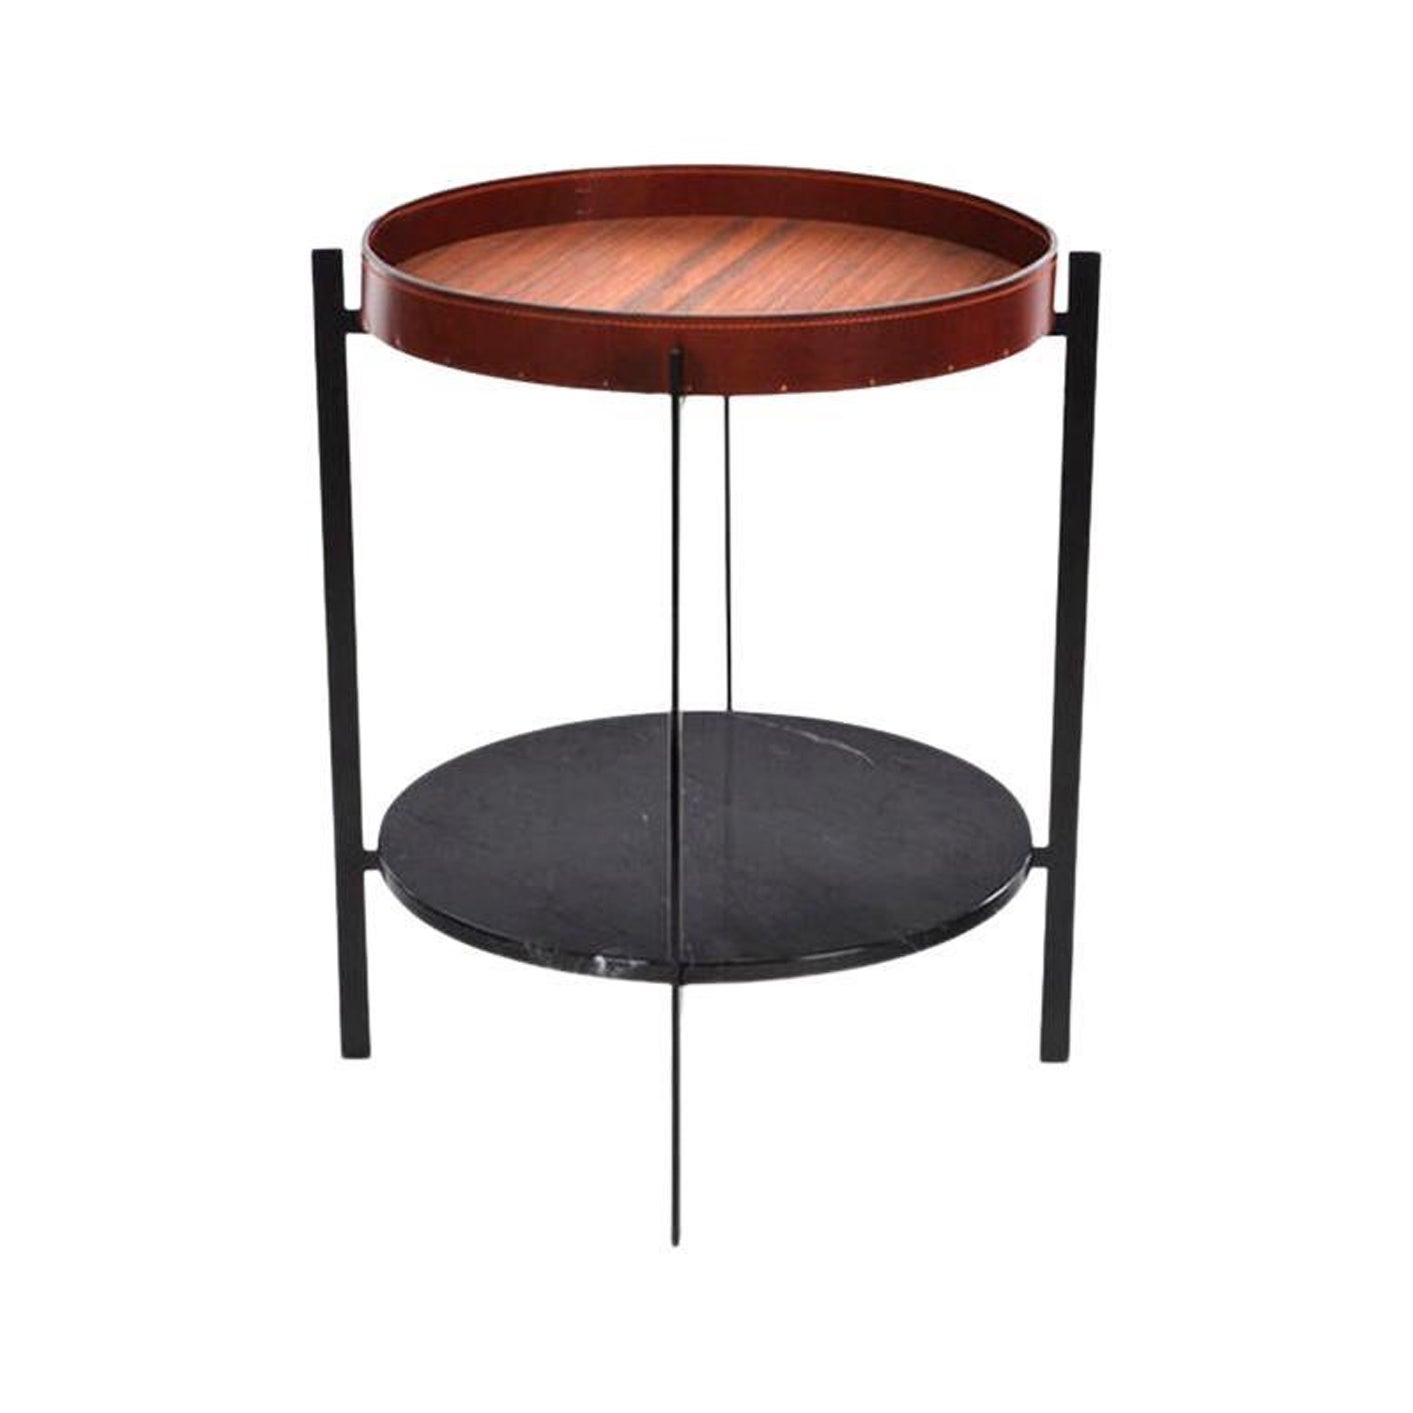 Cognac Leather, Teak Wood and Black Marquina Marble Deck Table by OxDenmarq For Sale